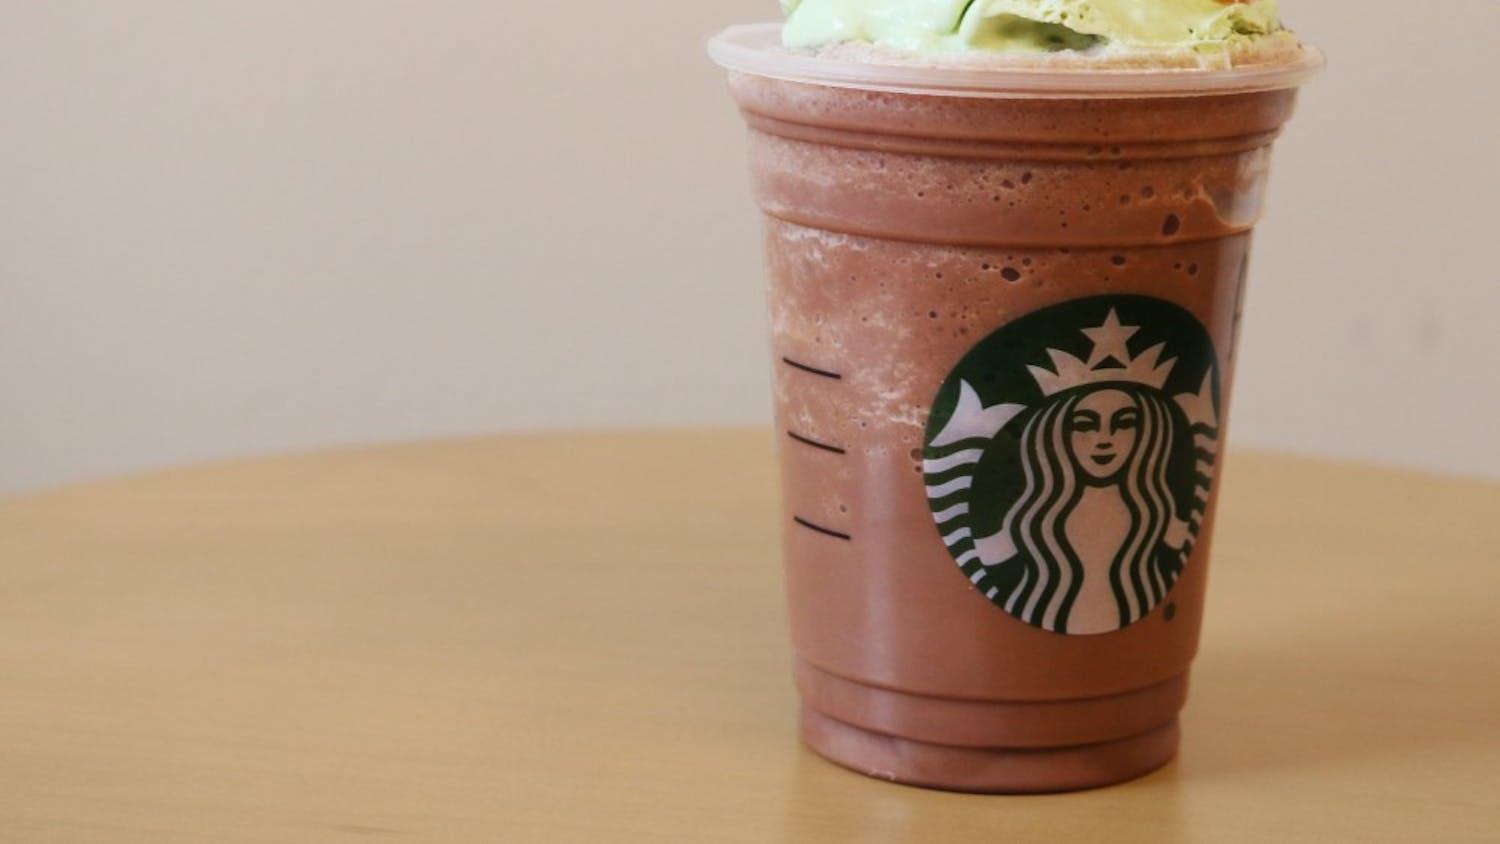 The Christmas Tree frappuccino recently came out at Starbucks. The drink consists of mocha and peppermint, matcha-infused whipped cream, a caramel drizzle, candied cranberries and a strawberry topper.